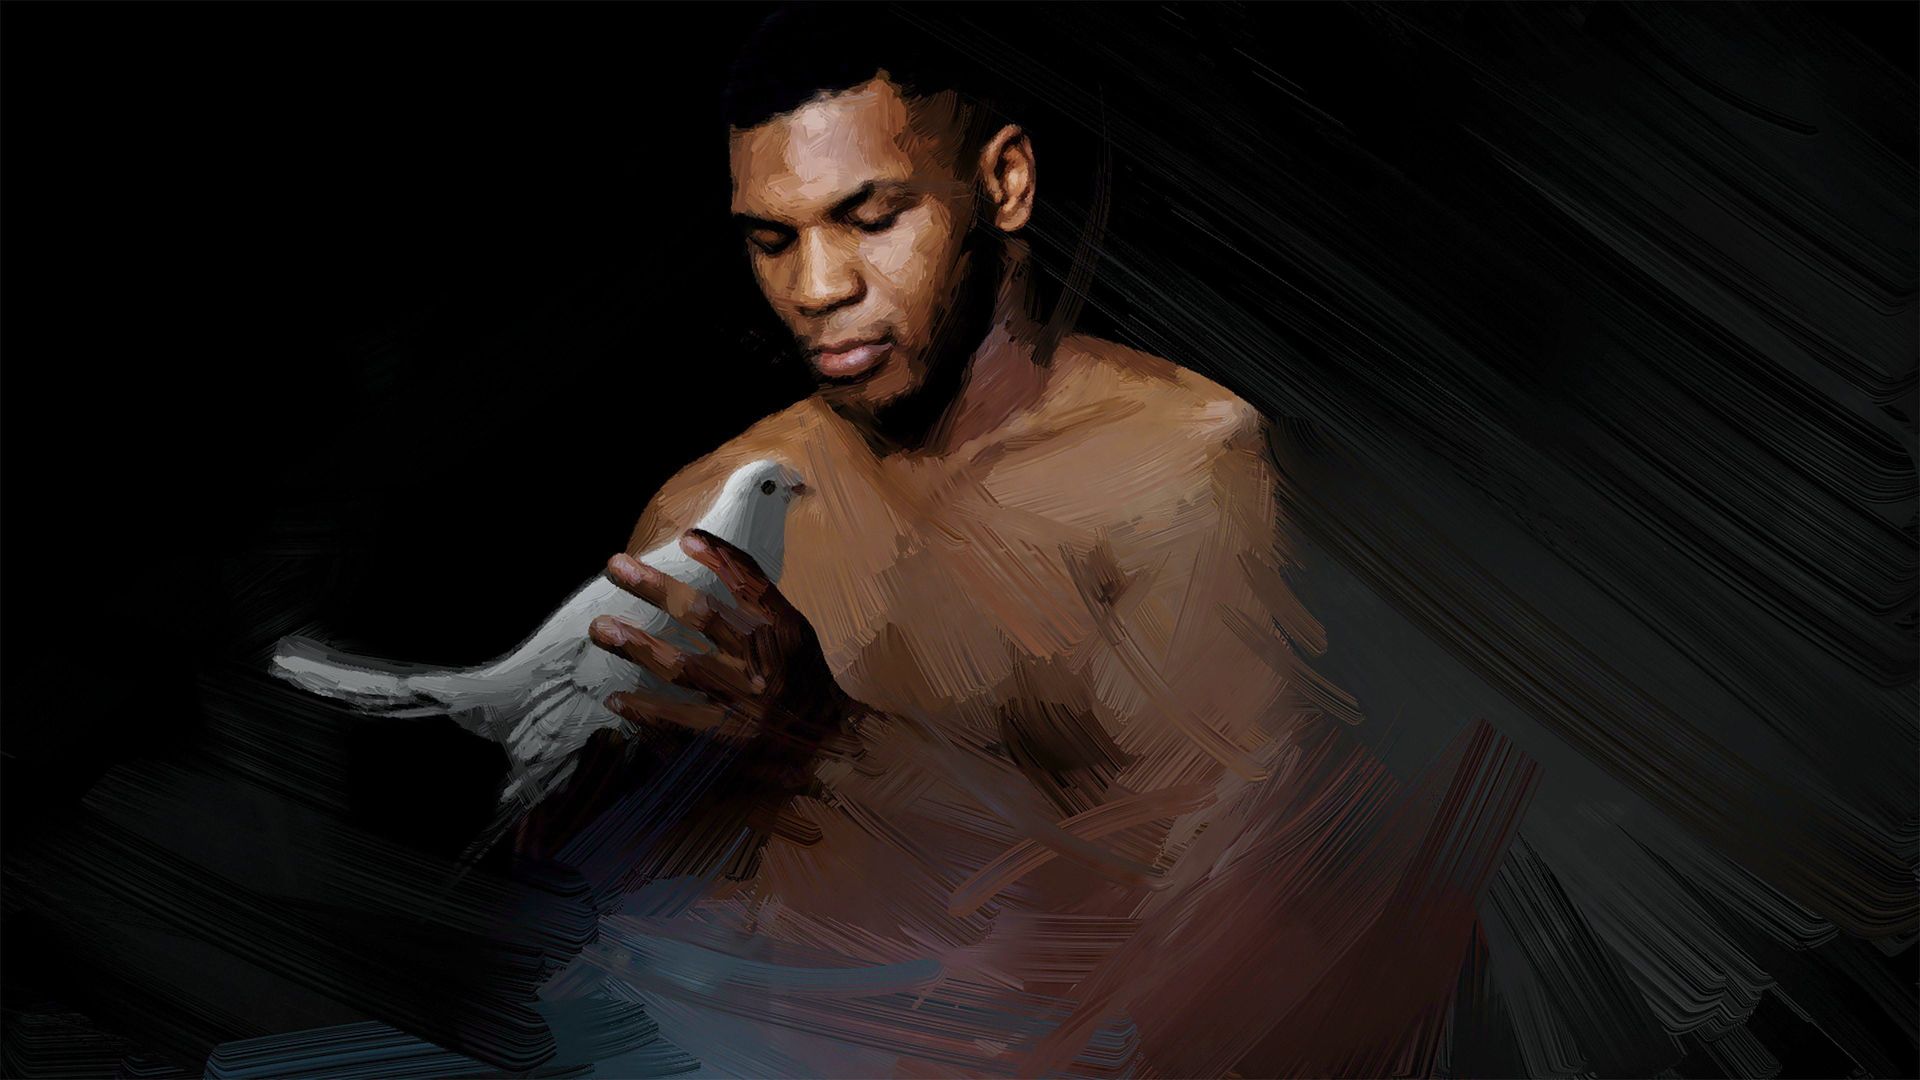 Mike Tyson: The Knockout background